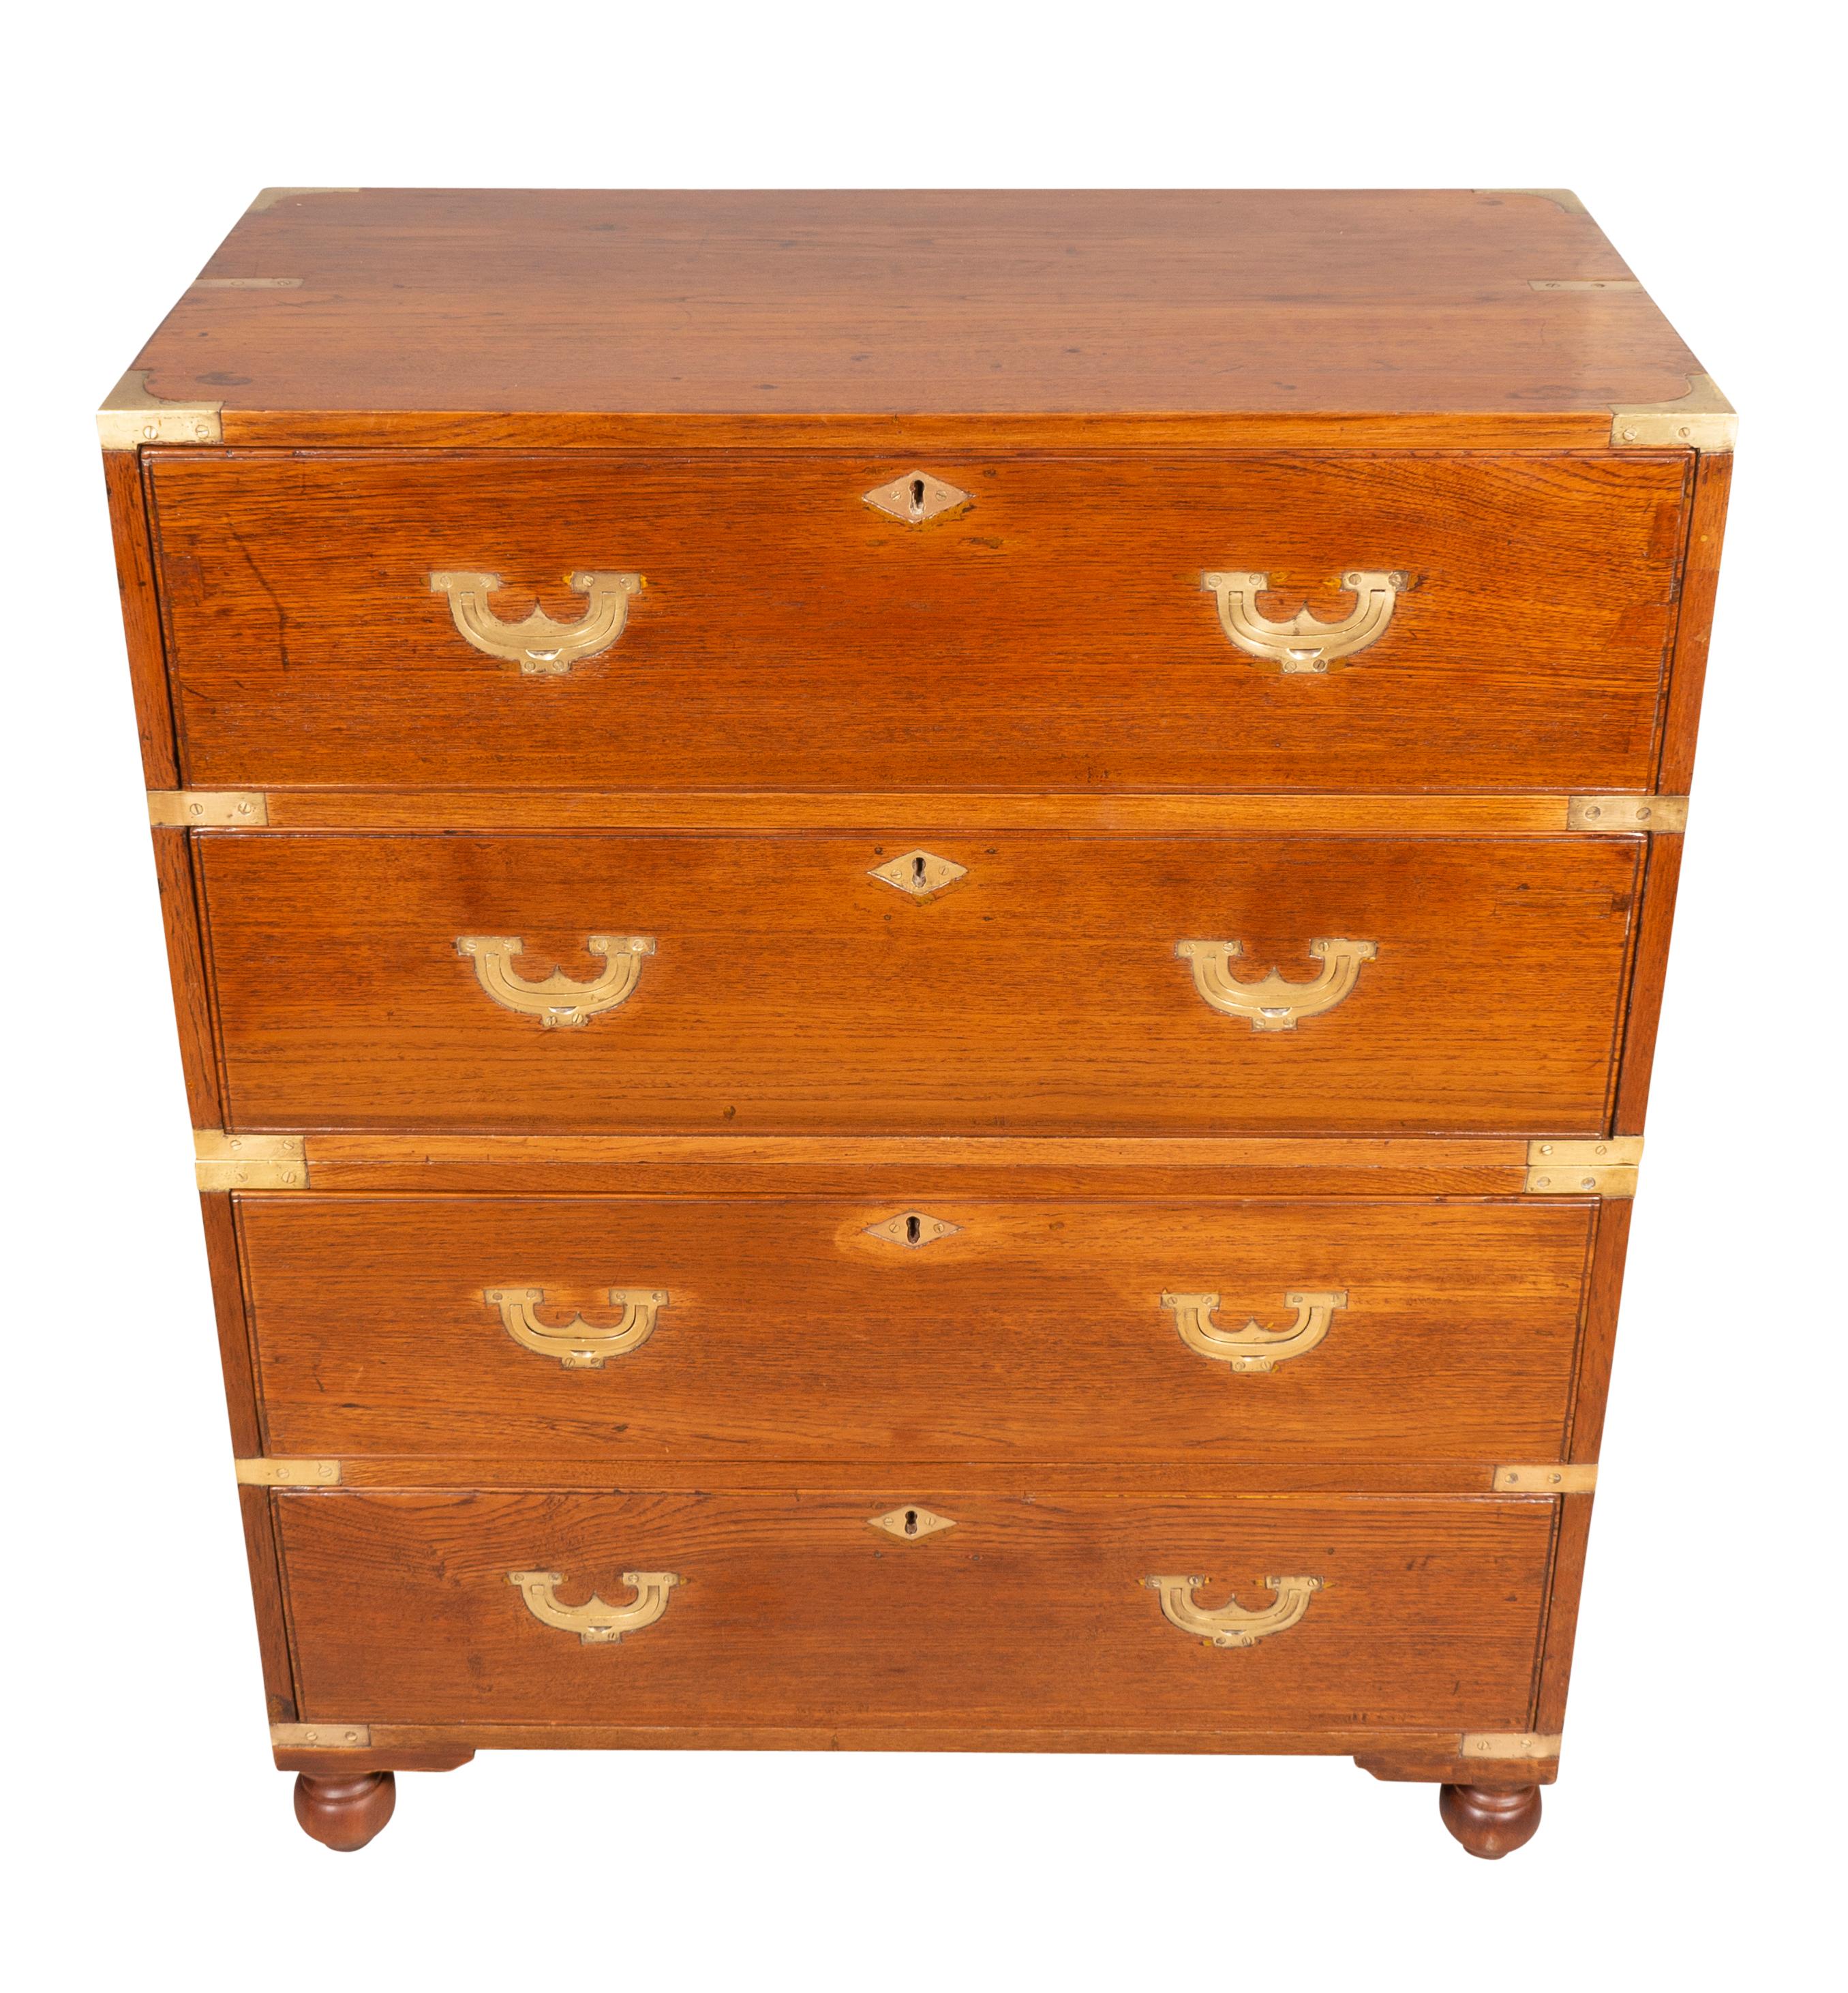 In two sections with a rectangular top over two long drawers over two long drawers. All with recessed brass handles. Iron side carrying handles. Ball feet.